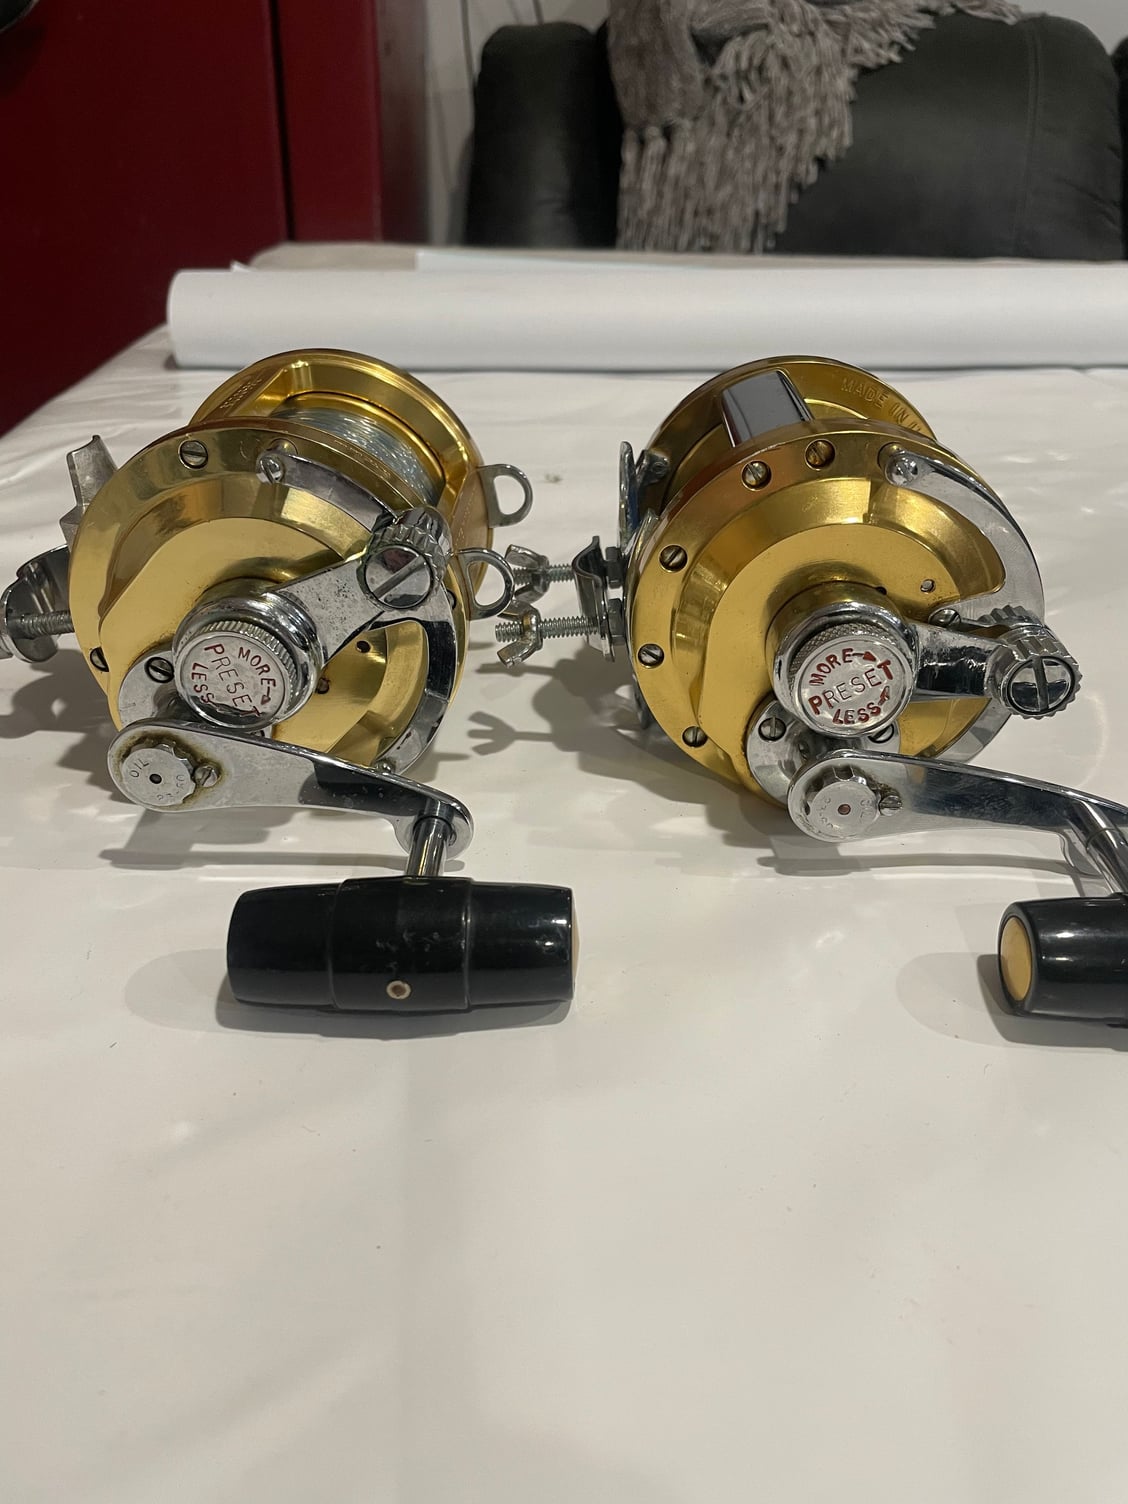 Penn International 12 reels - The Hull Truth - Boating and Fishing Forum